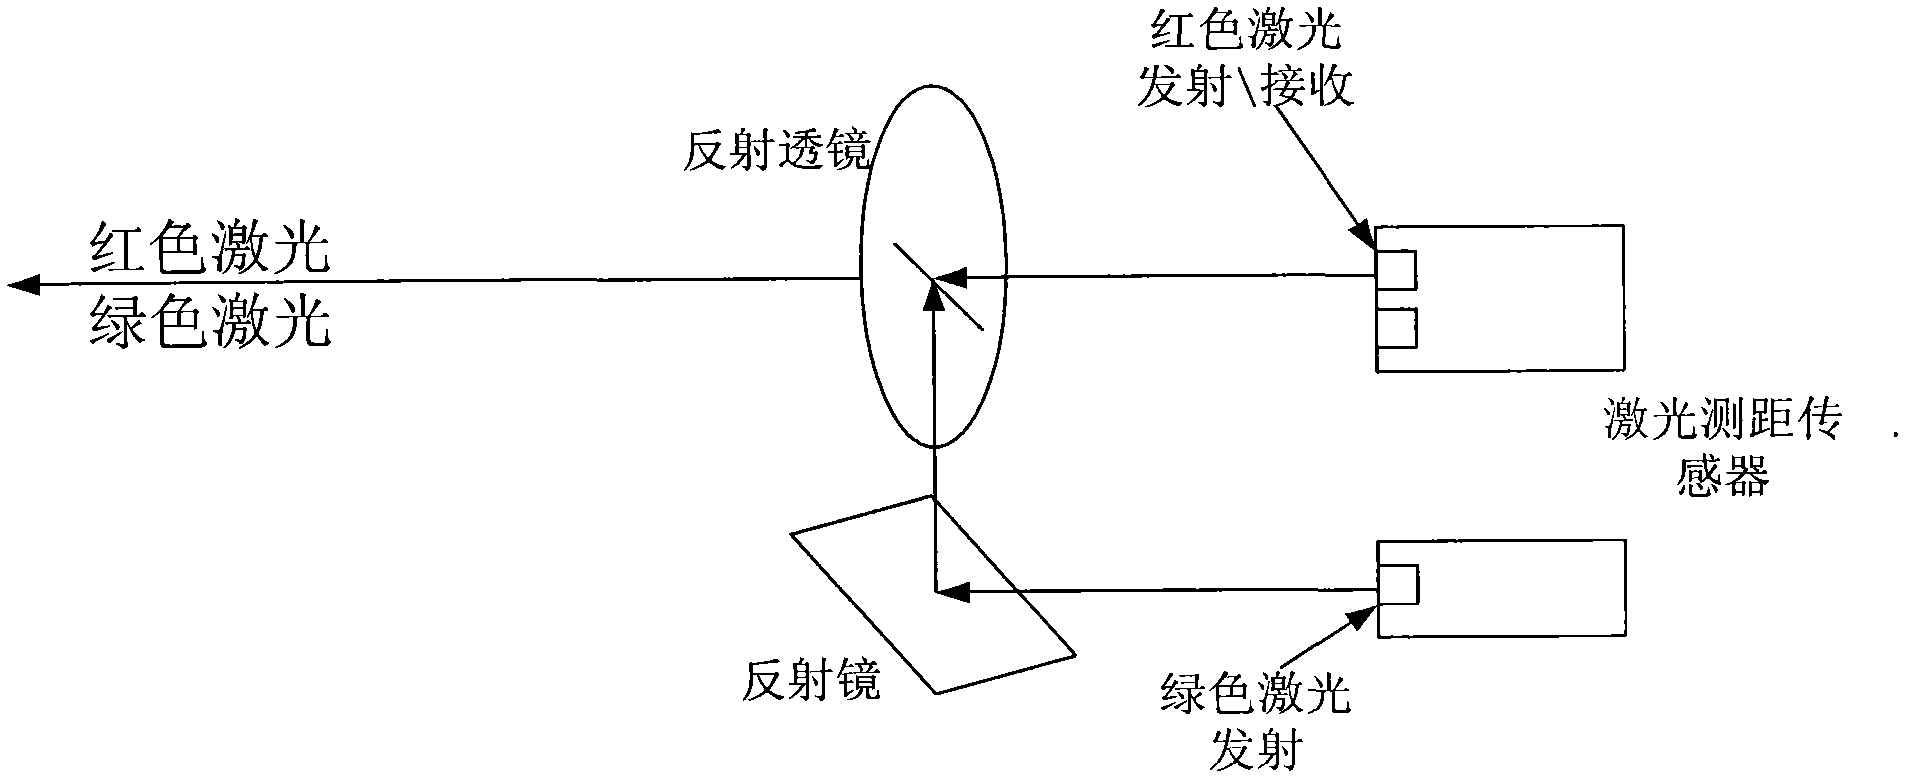 Positioning method of distance measurement laser point of remote distance measurement system based on coaxial dual lasers